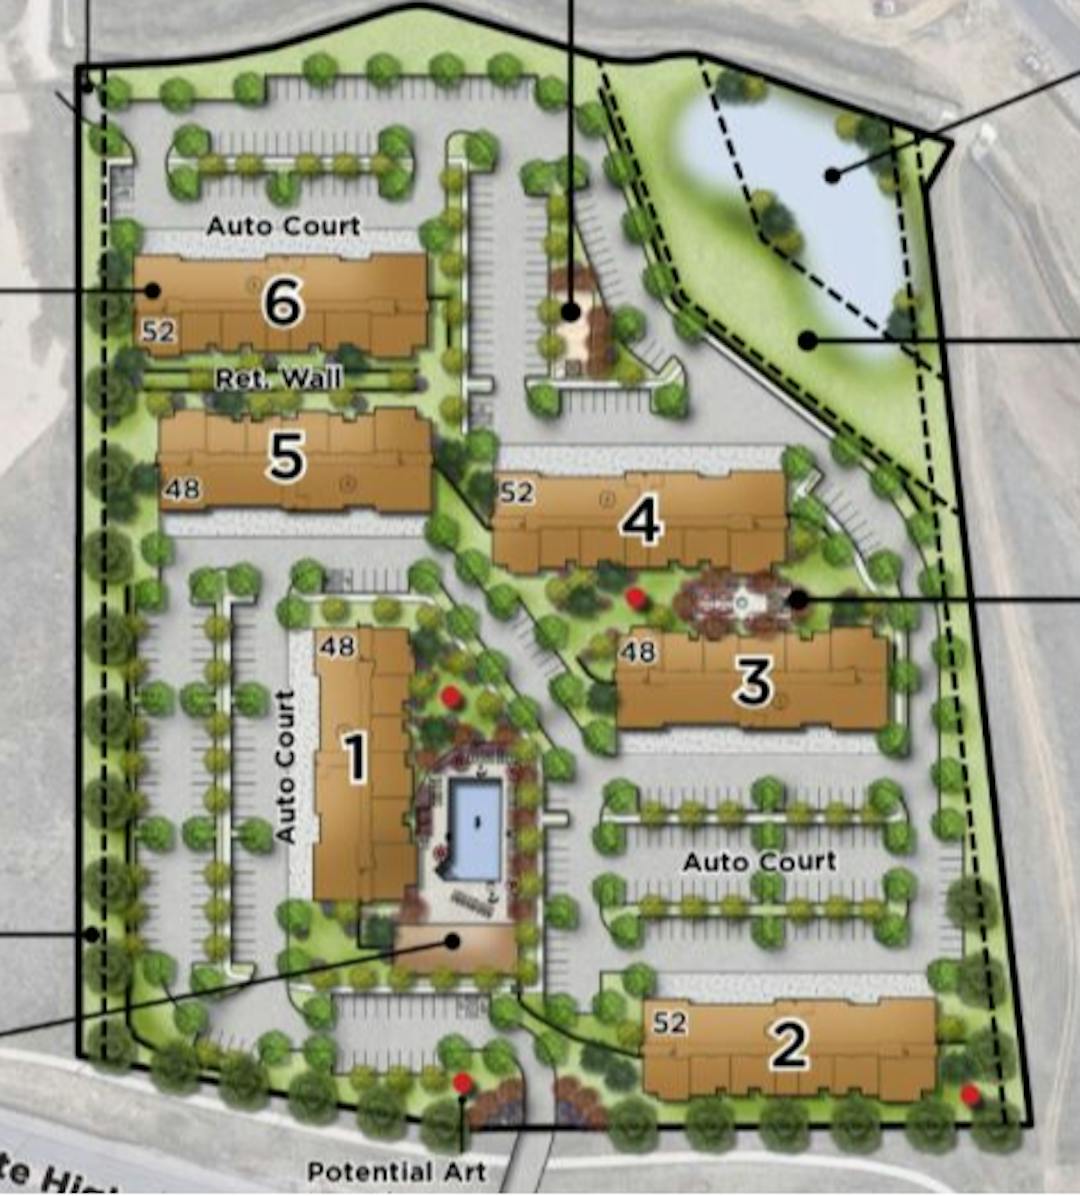 Site plan showing six buildings, parking and amenity spaces on a property. 